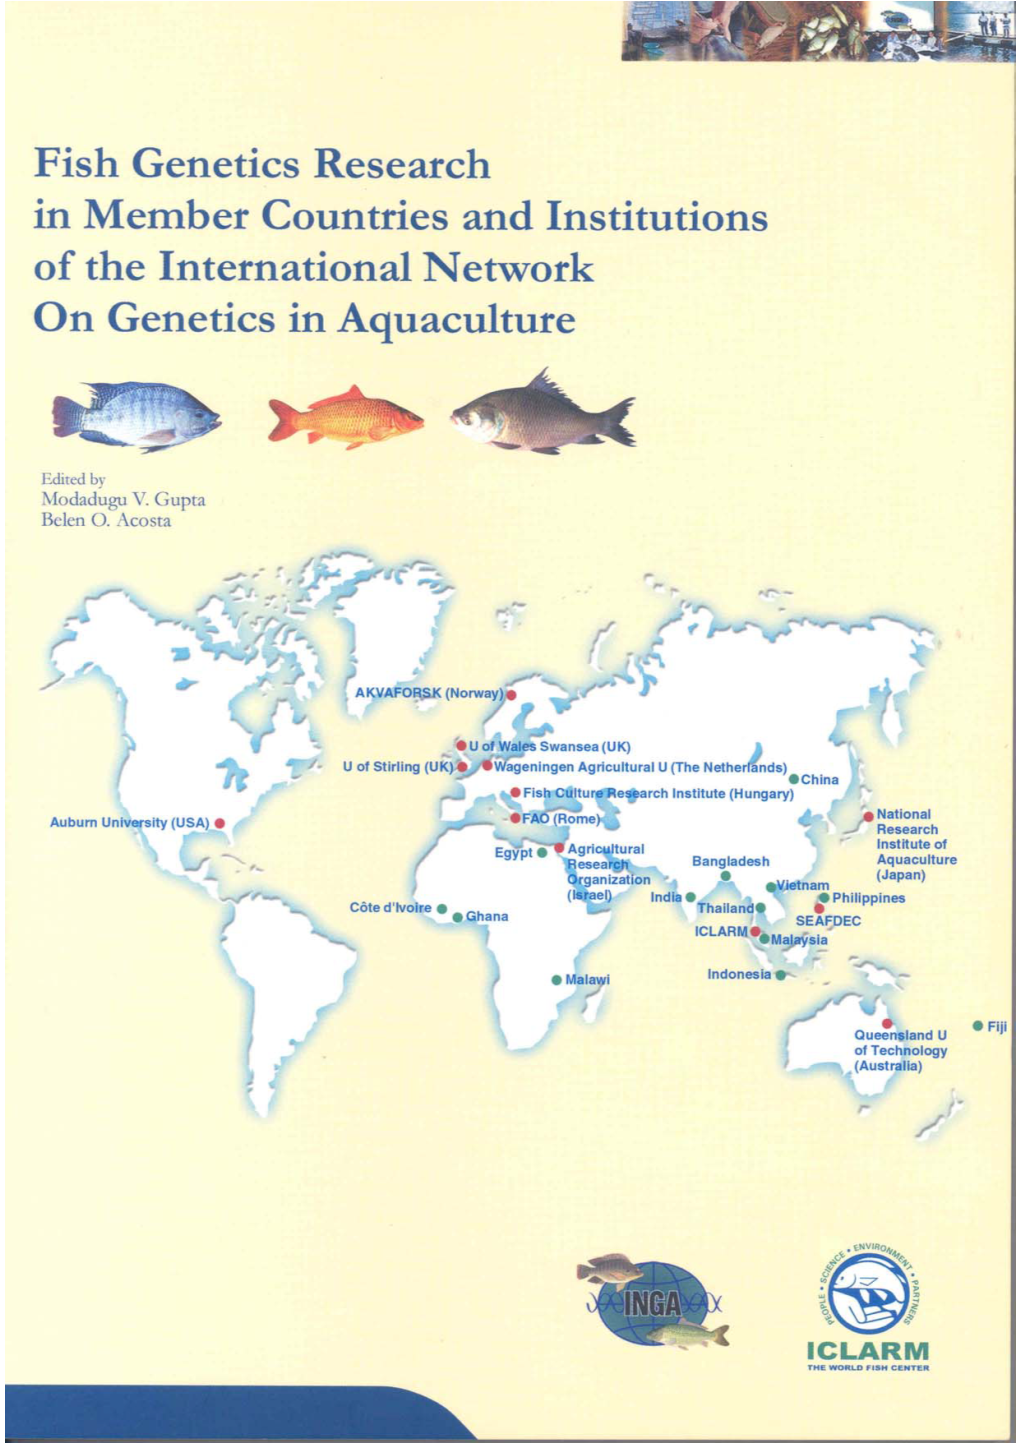 Fish Genetics Research in Member Countries and Institutions of the International Network on Genetics in Aquaculture